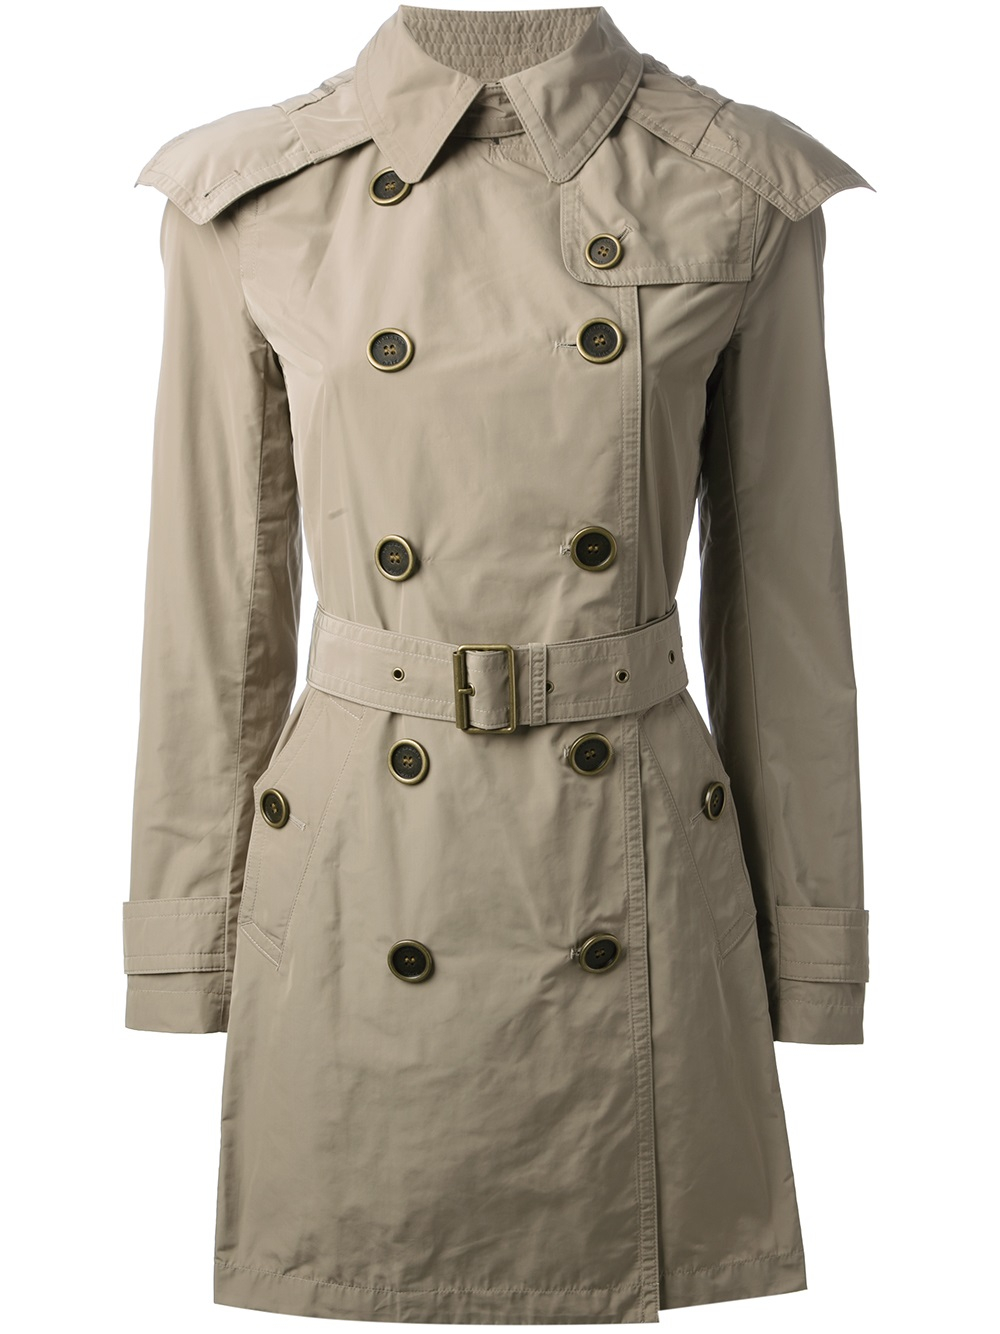 Lyst - Burberry Classic Trench Coat in Blue